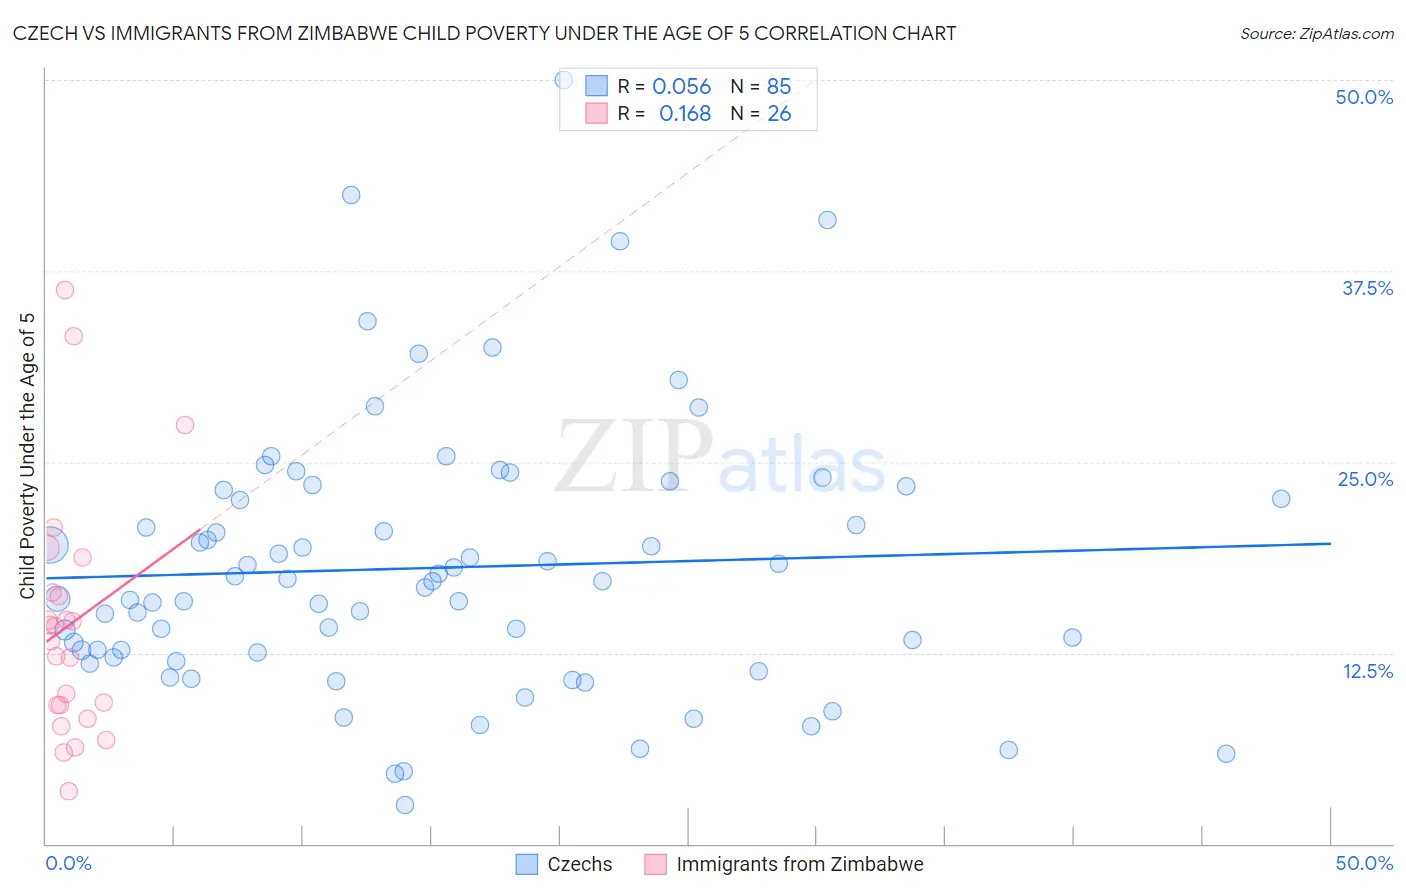 Czech vs Immigrants from Zimbabwe Child Poverty Under the Age of 5